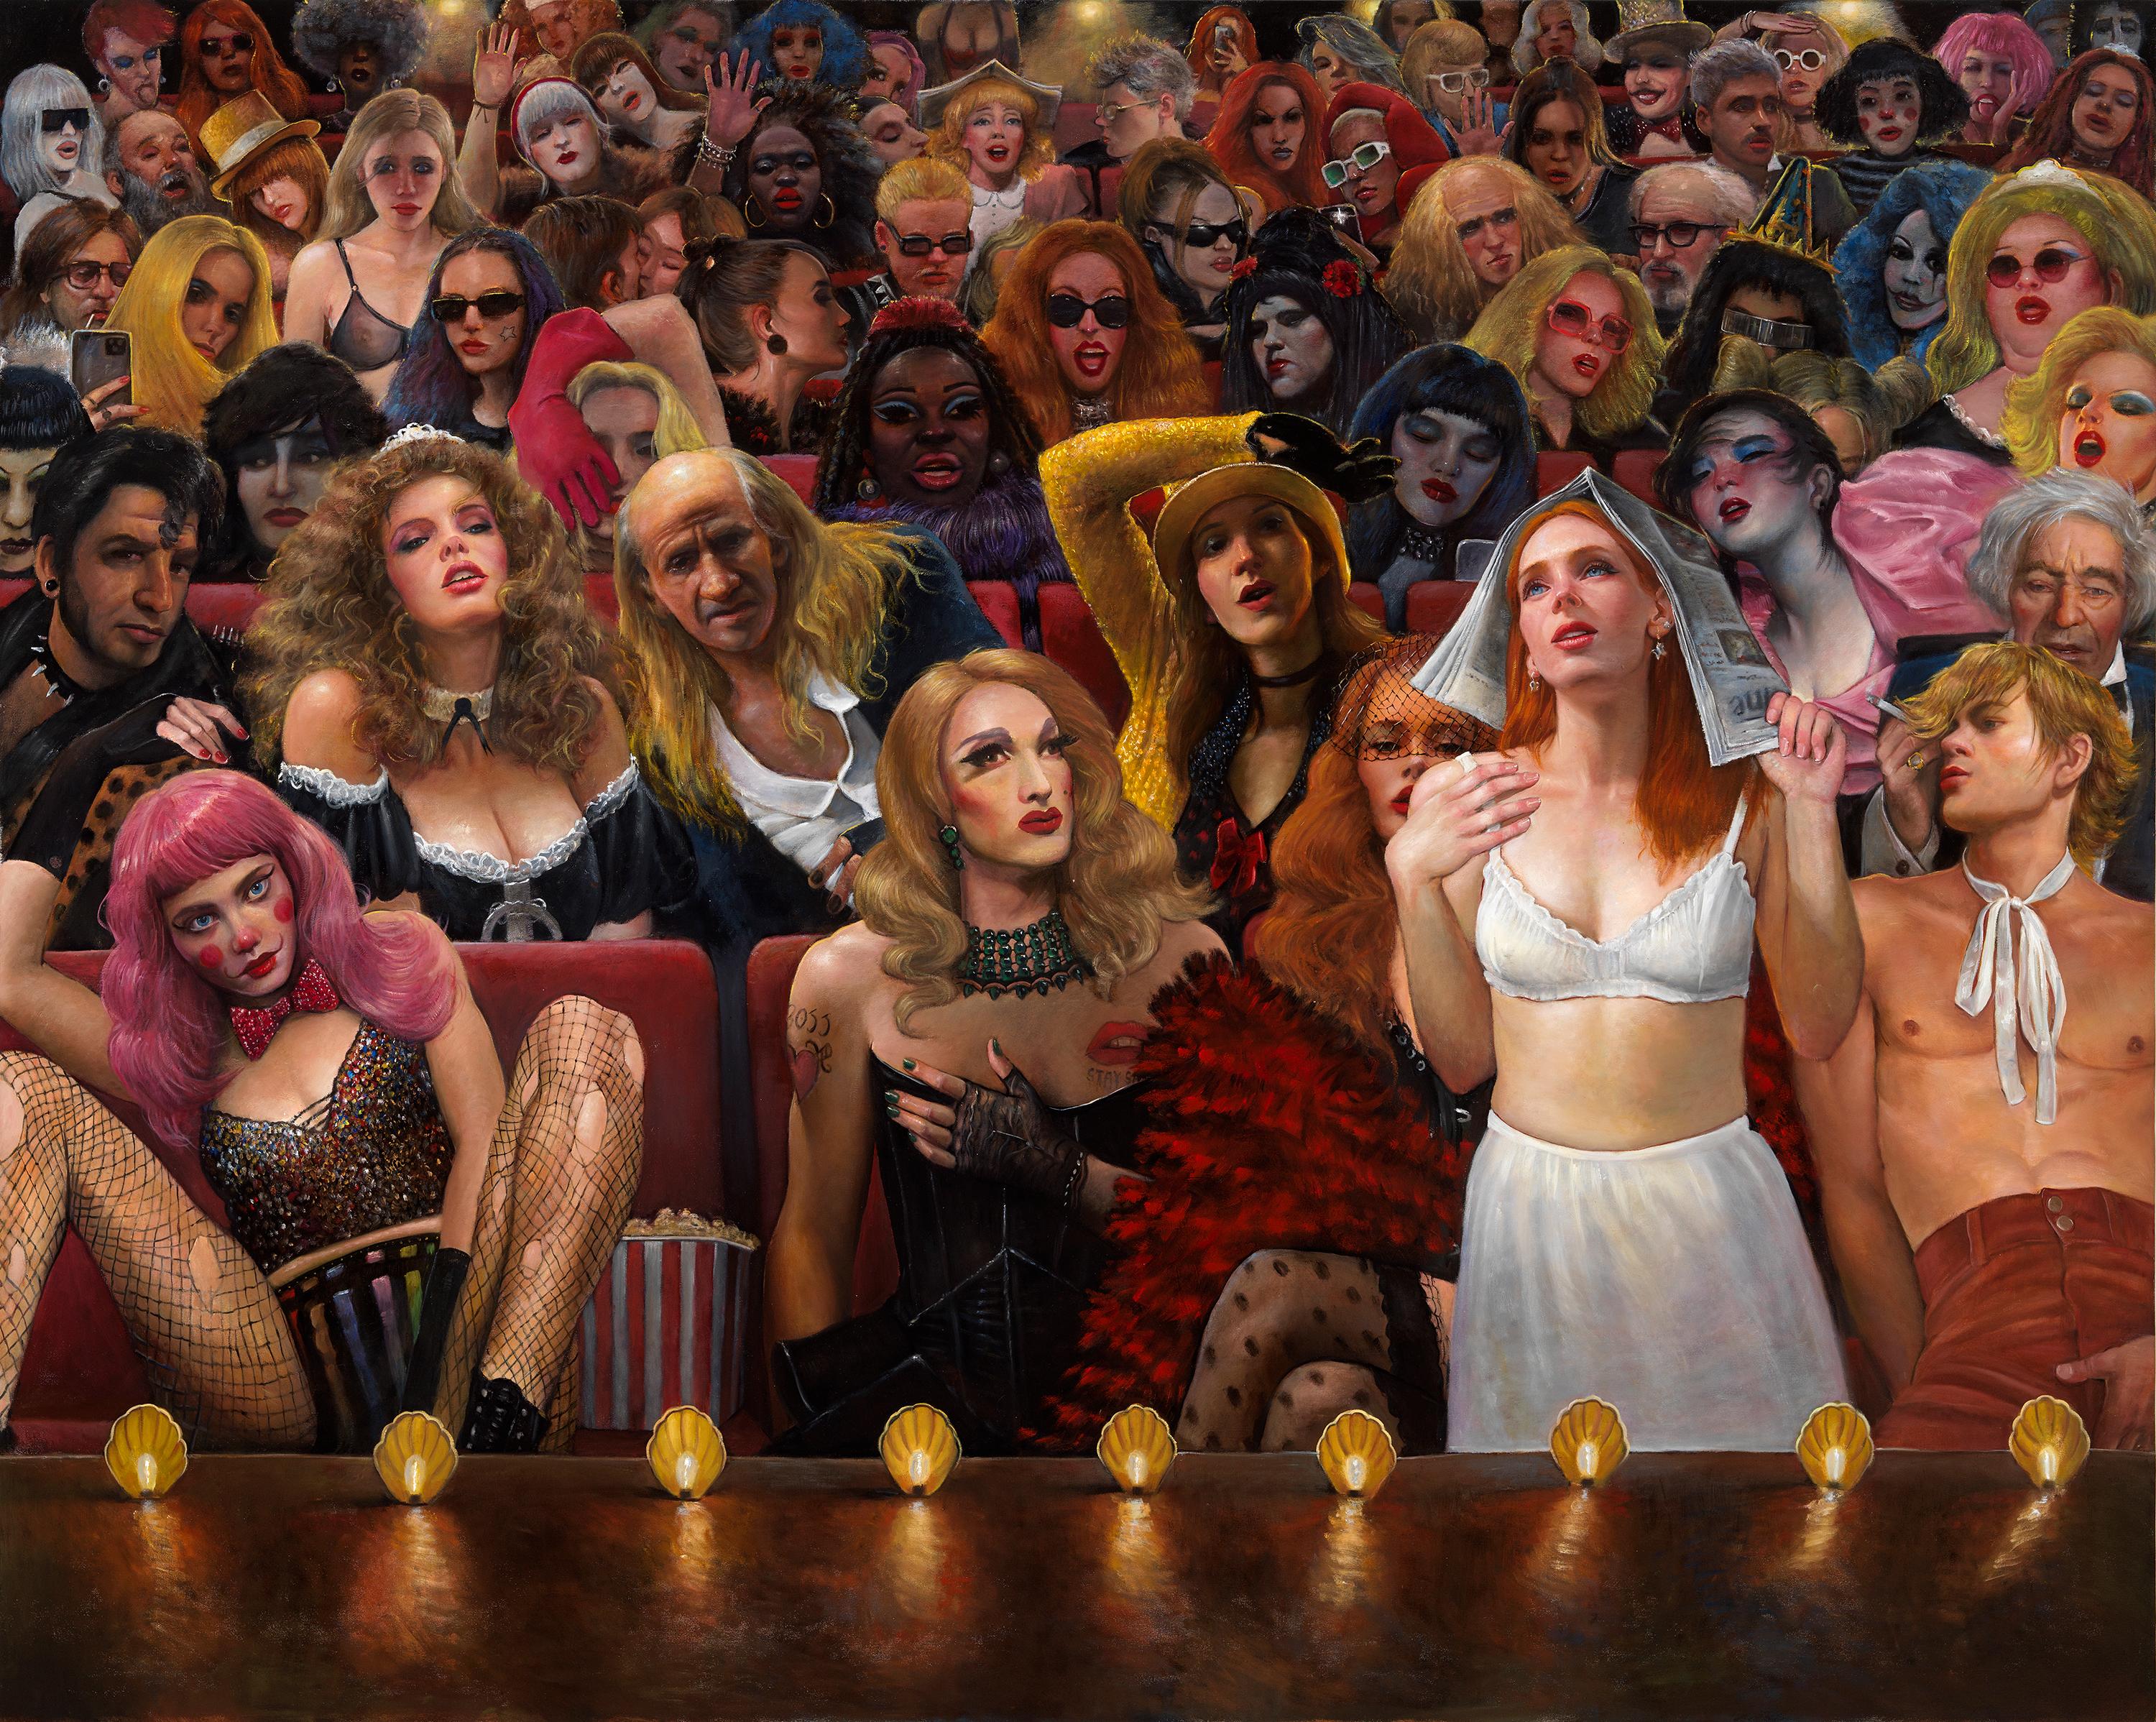 Bruno Surdo Figurative Painting - On Stage It's Okay to Be Different - An Homage to the Rocky Horror Picture Show